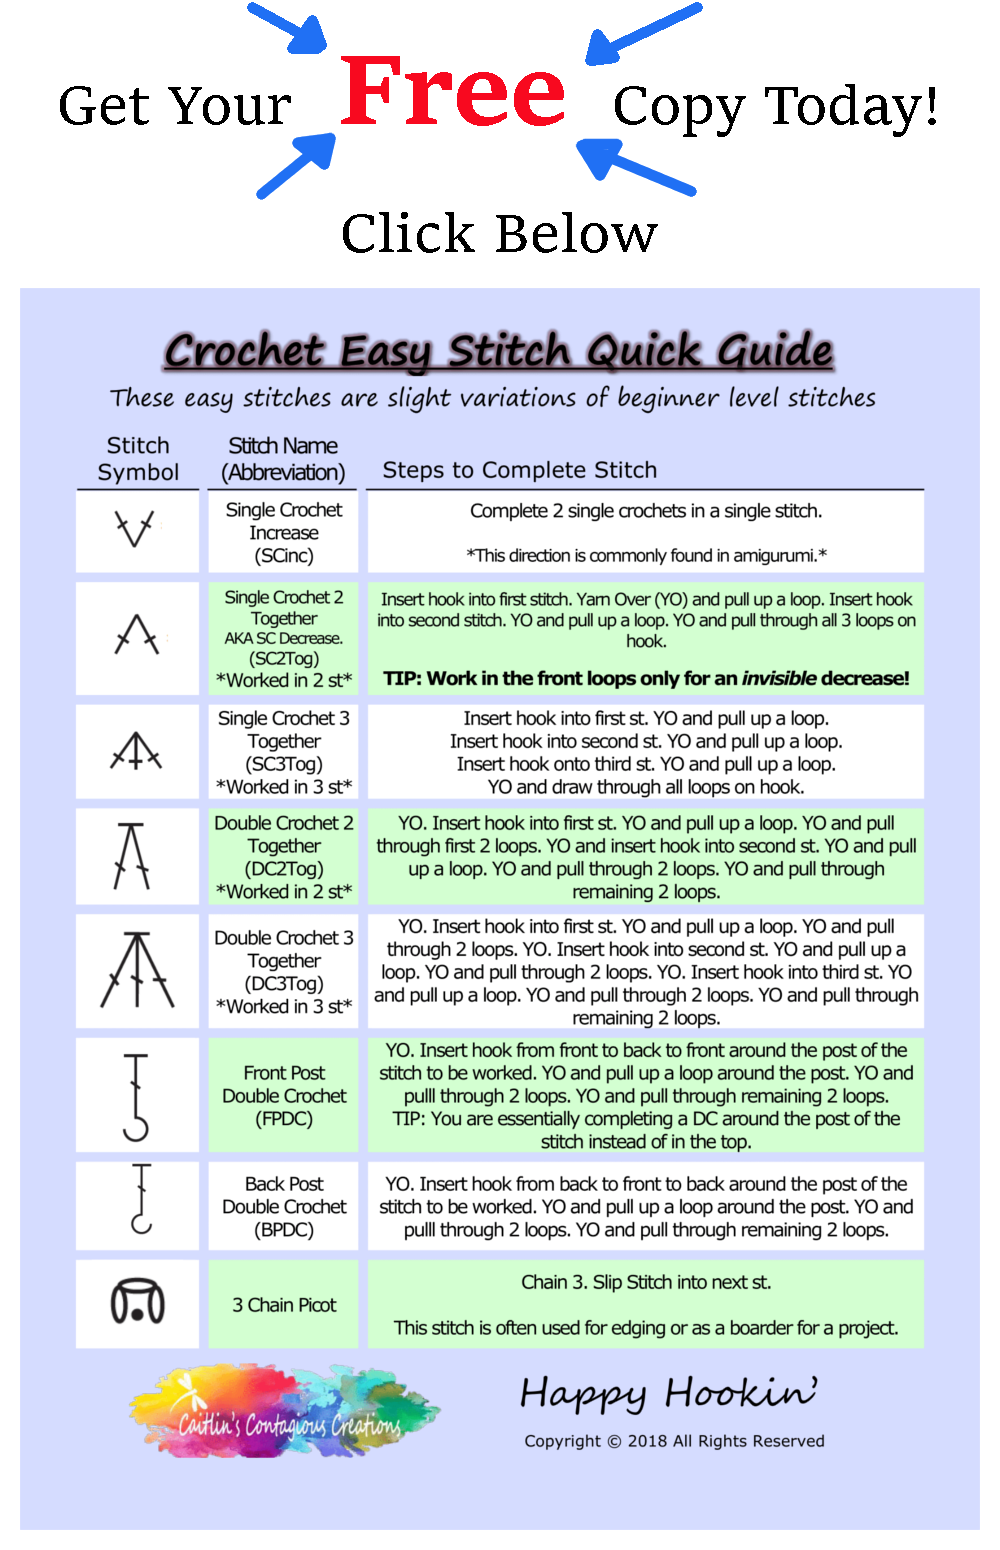 easy-crochet-stitch-quick-guide-caitlin-s-contagious-creations